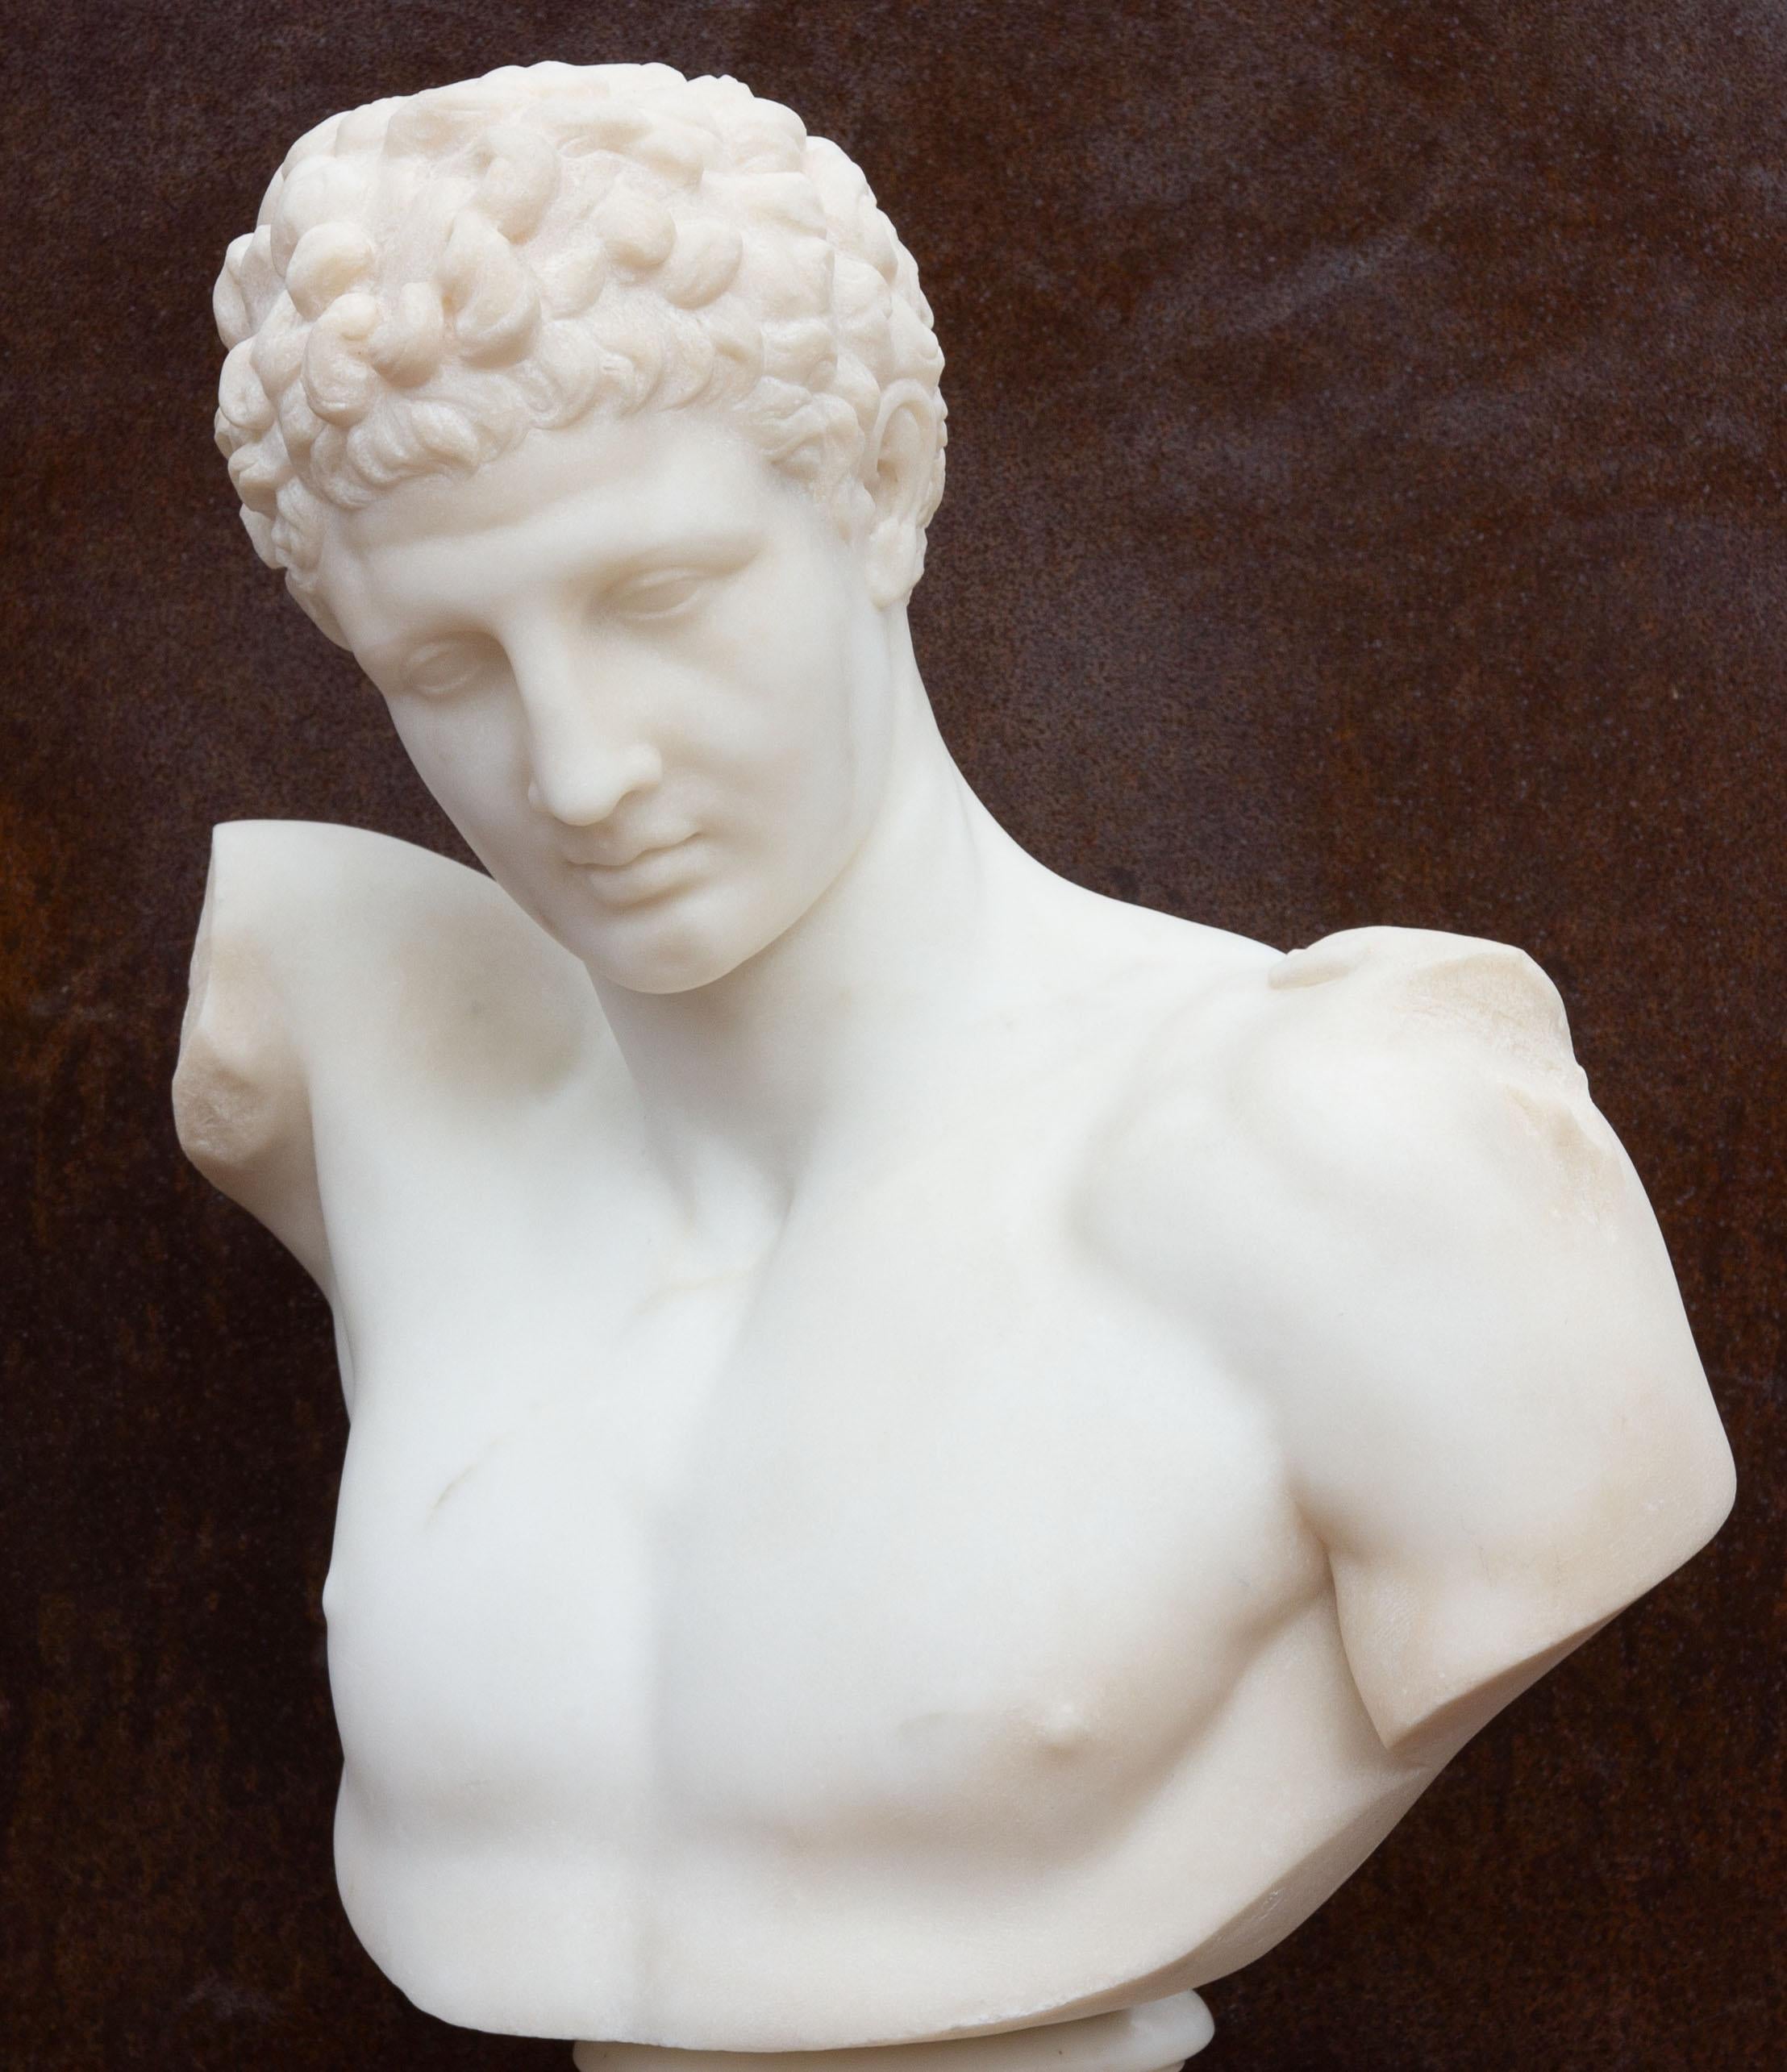 19th Century Antique Marble Bust of Hermes 'Mercury'